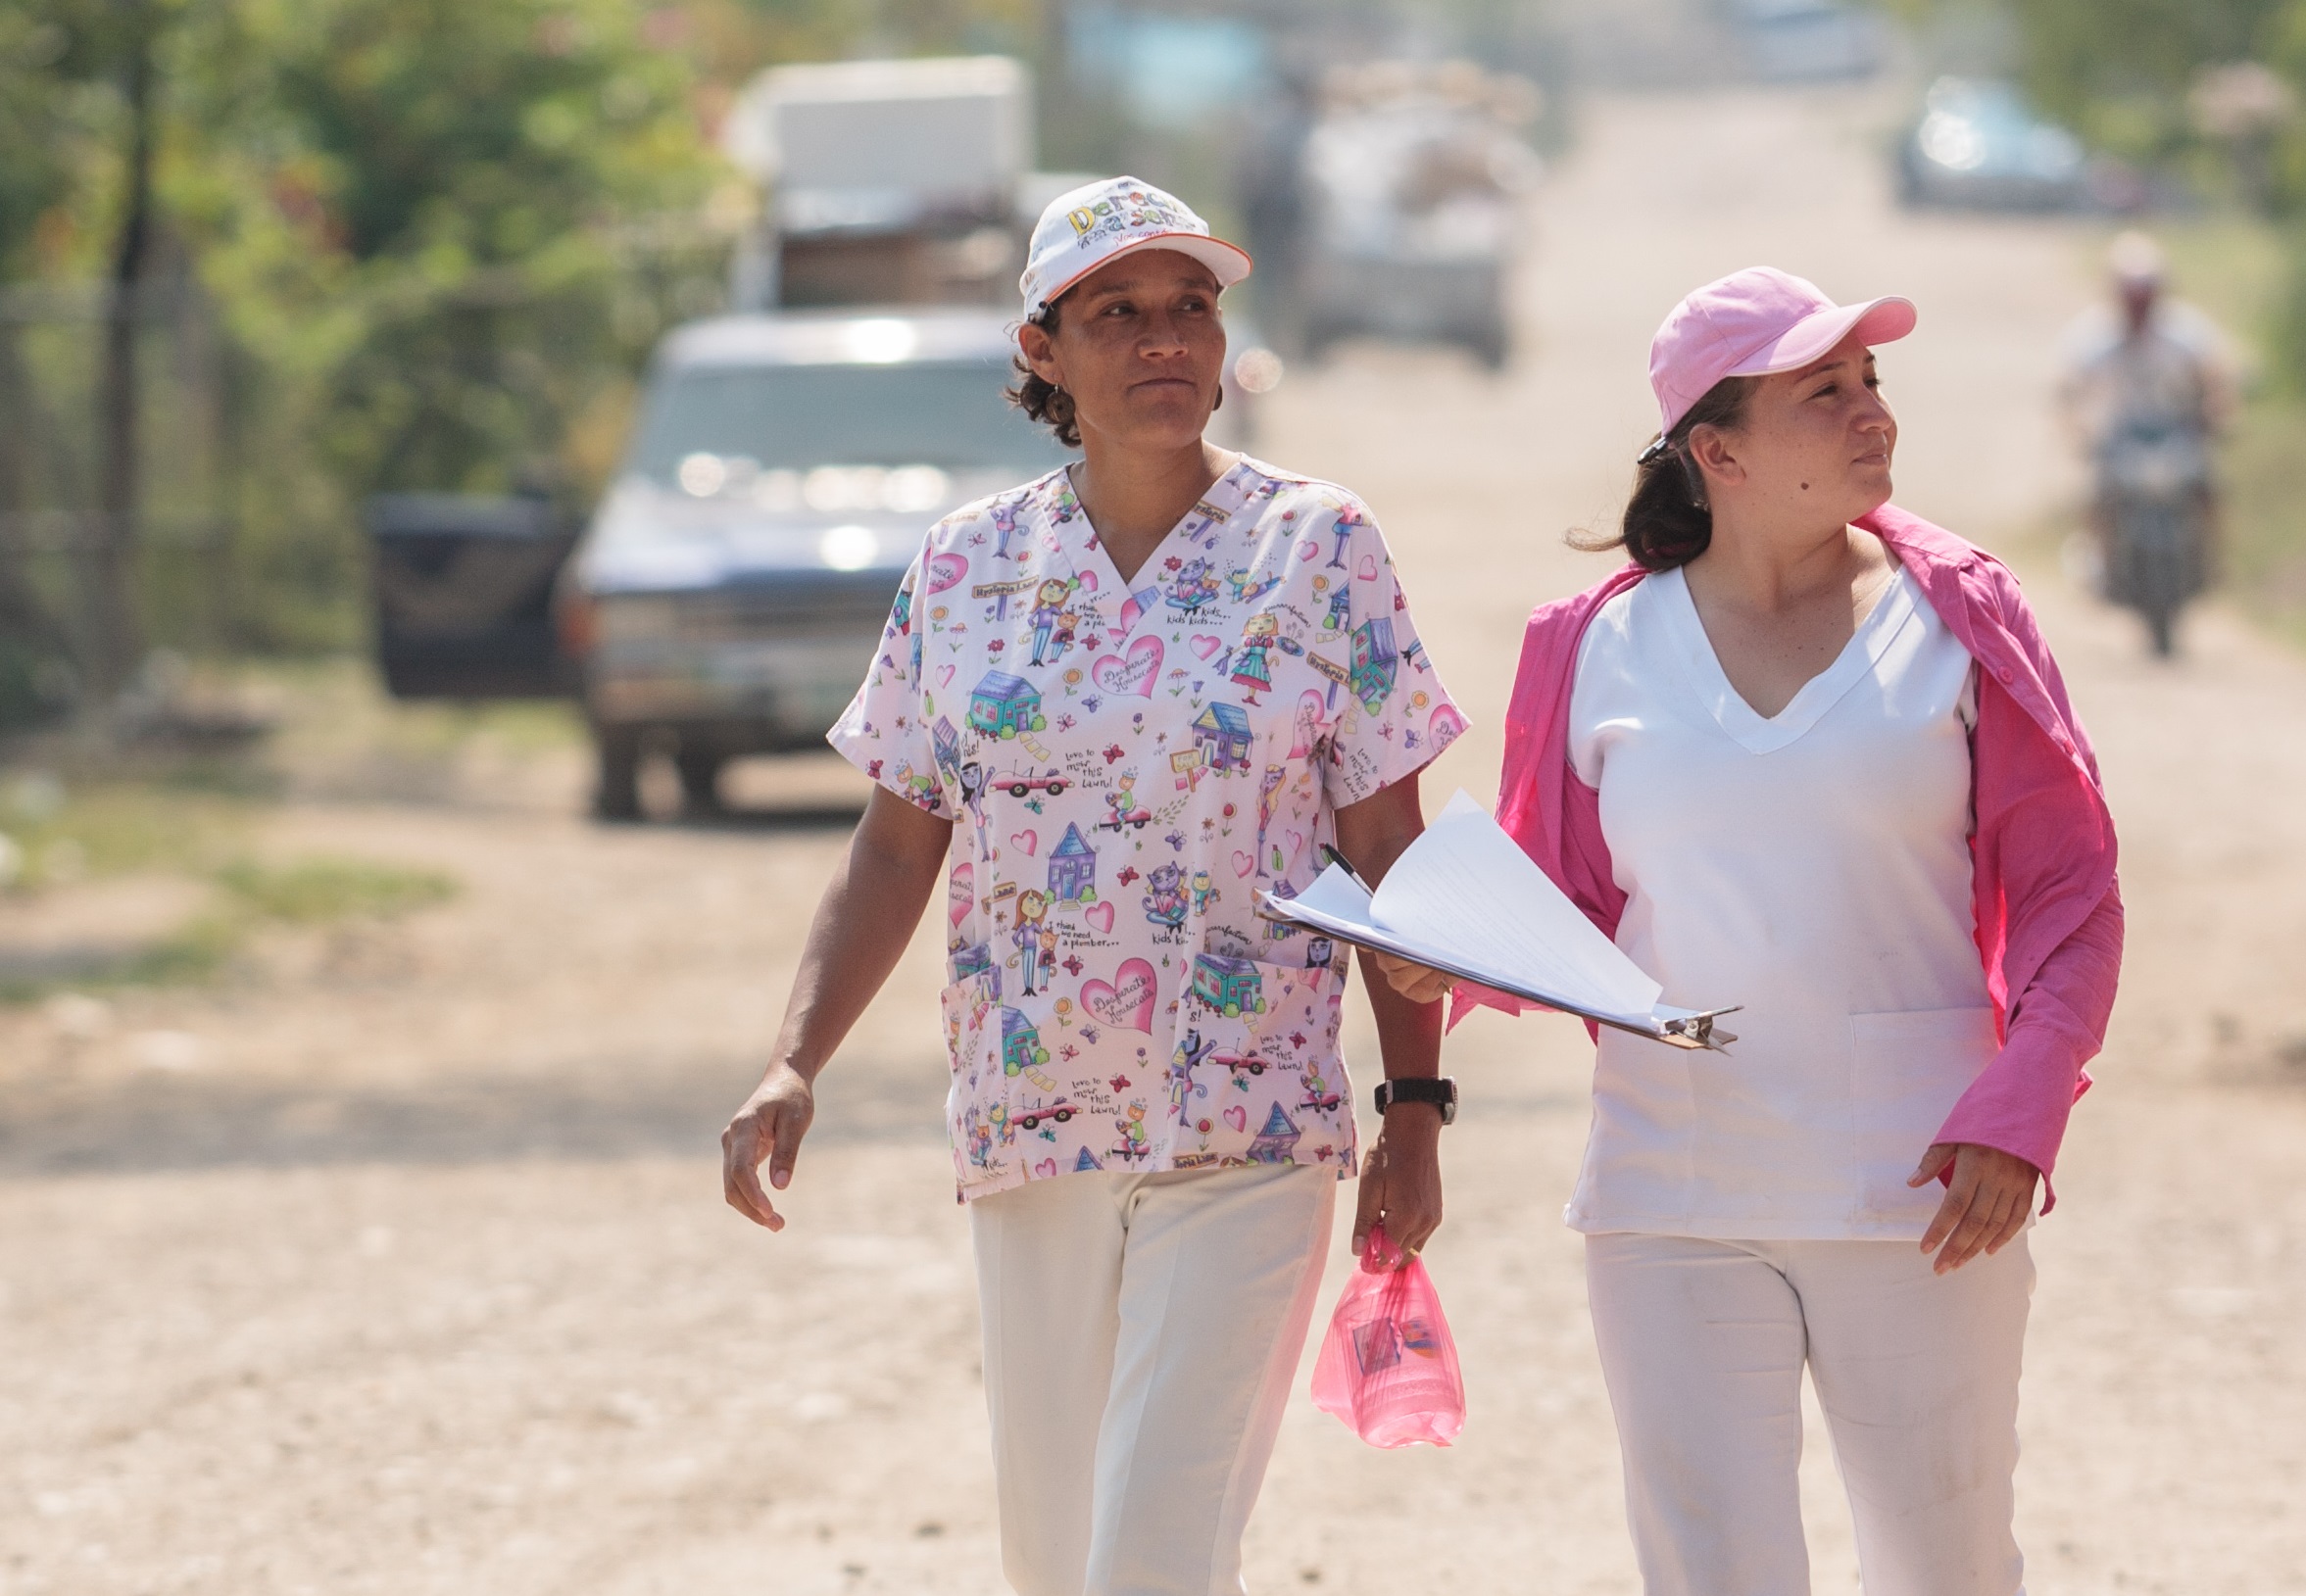 Health workers carry out a house-to-house survey to make sure children were vaccinated in San Esteban, Honduras on Thursday April 25, 2013.